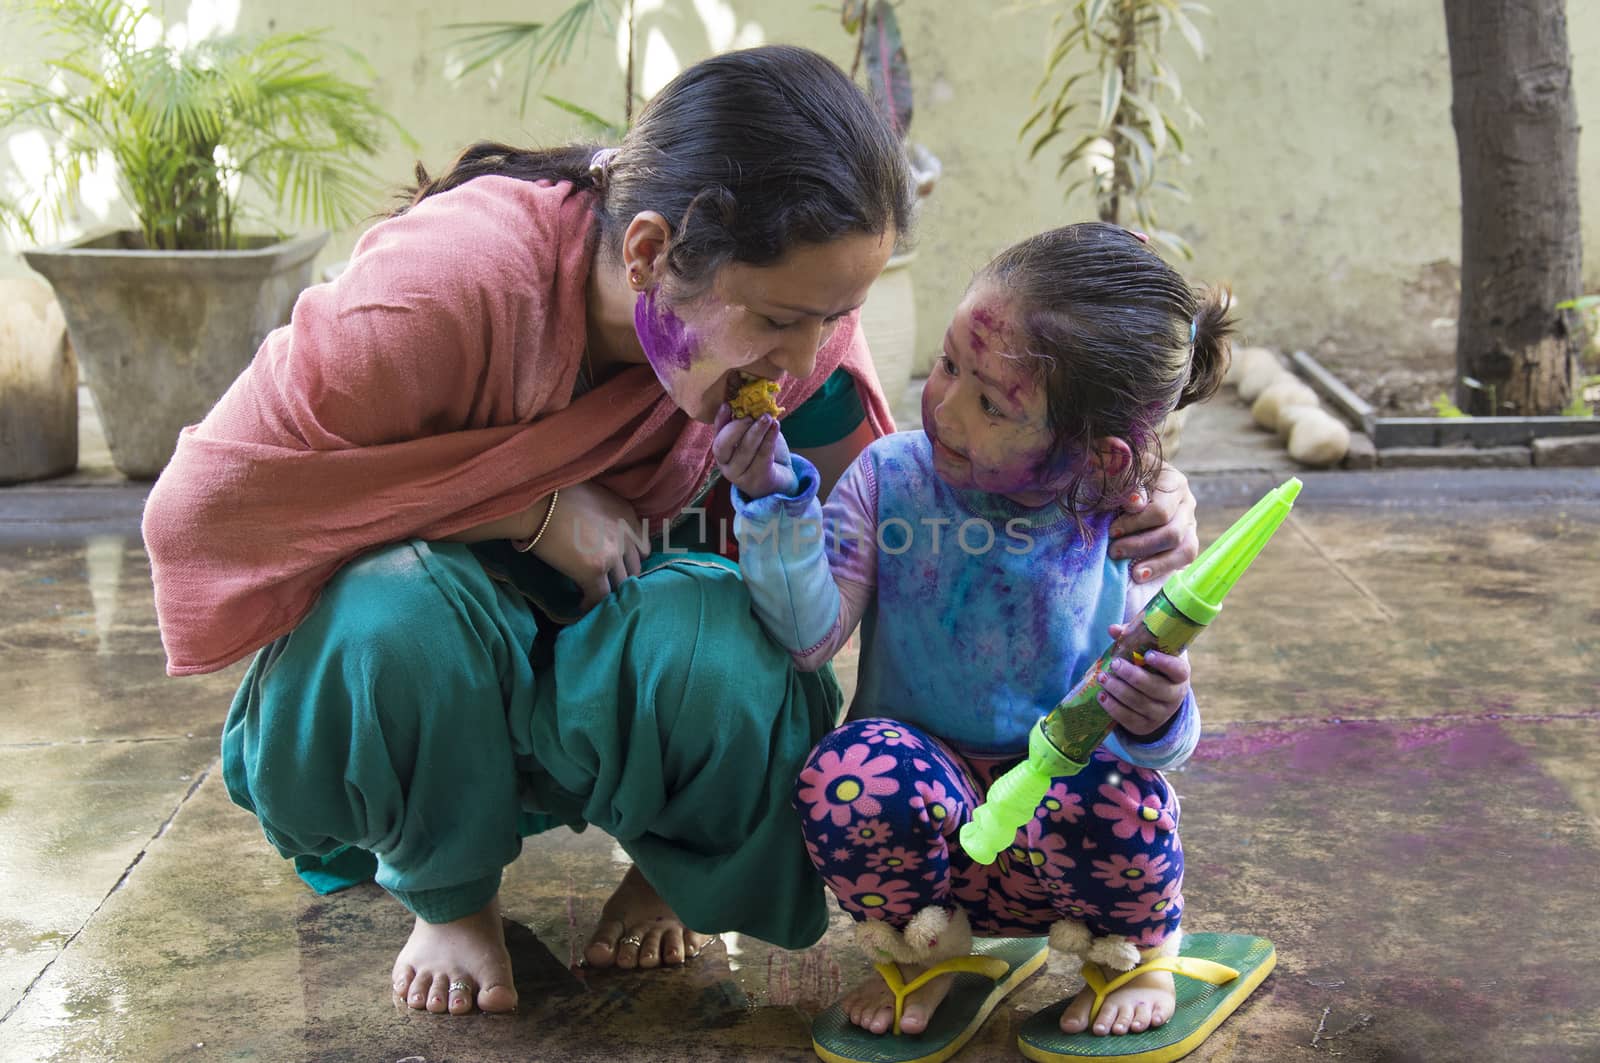 Mother and daughter celebrating Holi, the festival of colors. by dushi82